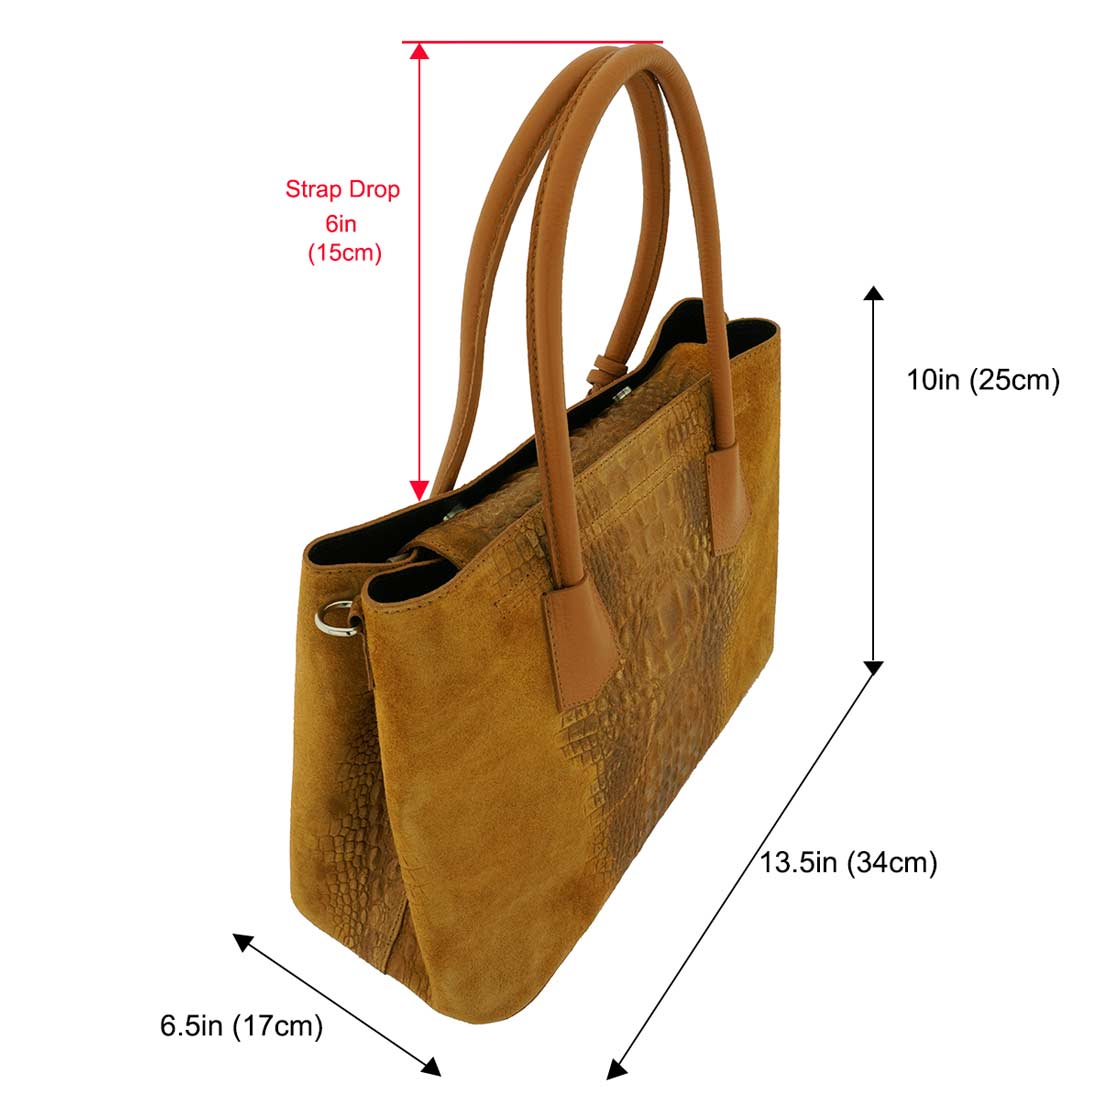 Fioretta Italian Genuine Leather Suede Carryall Top Handle Tote Bag For Women - Camel Brown